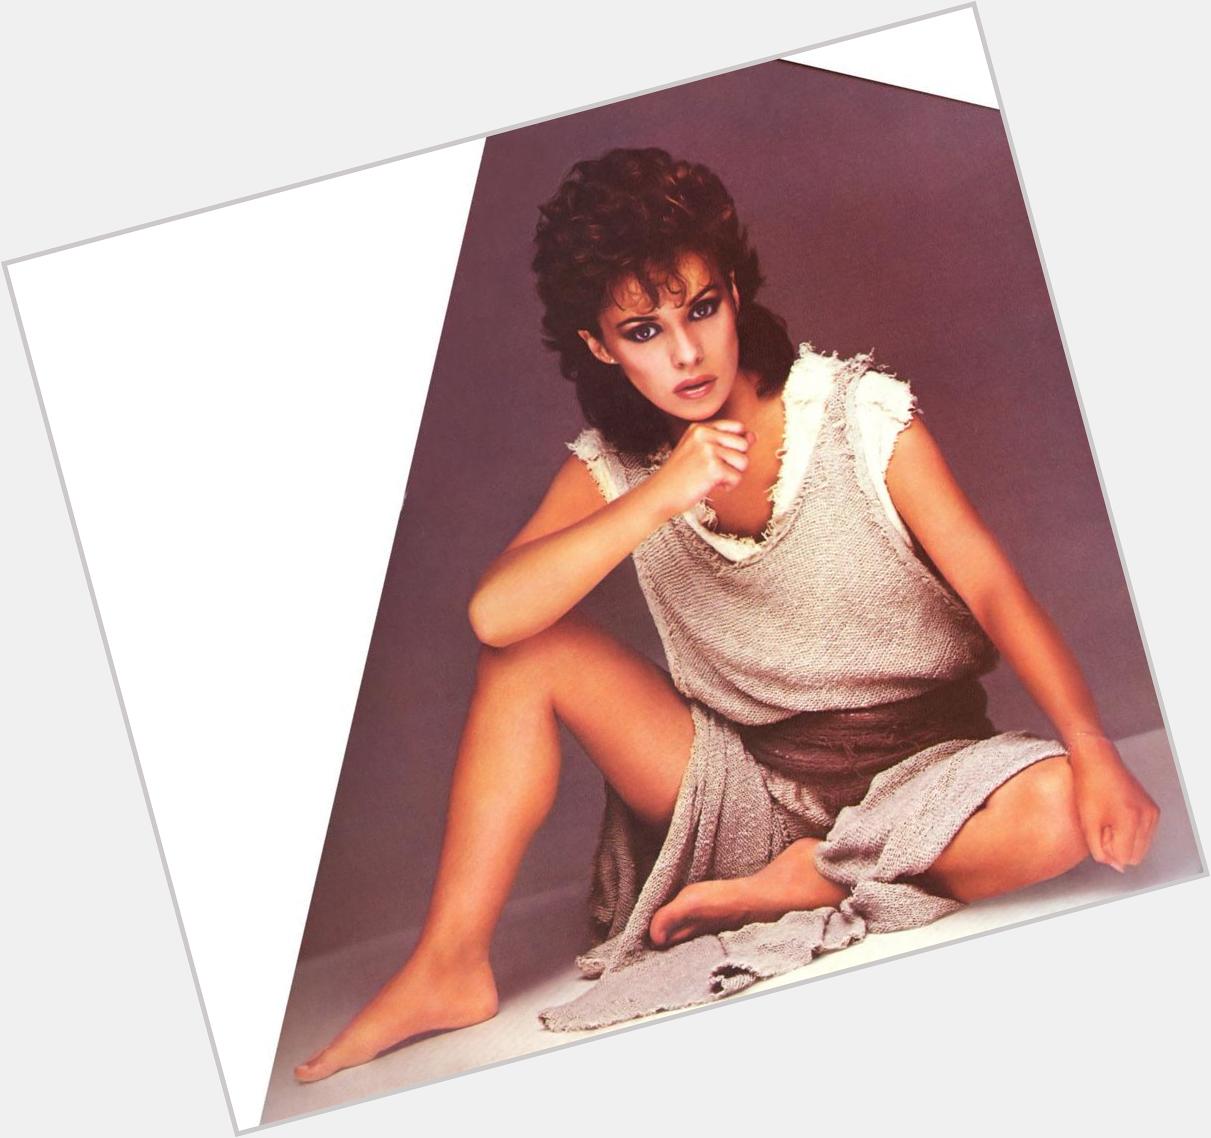 Happy Birthday to Sheena Easton, who would have turned 56 today! 